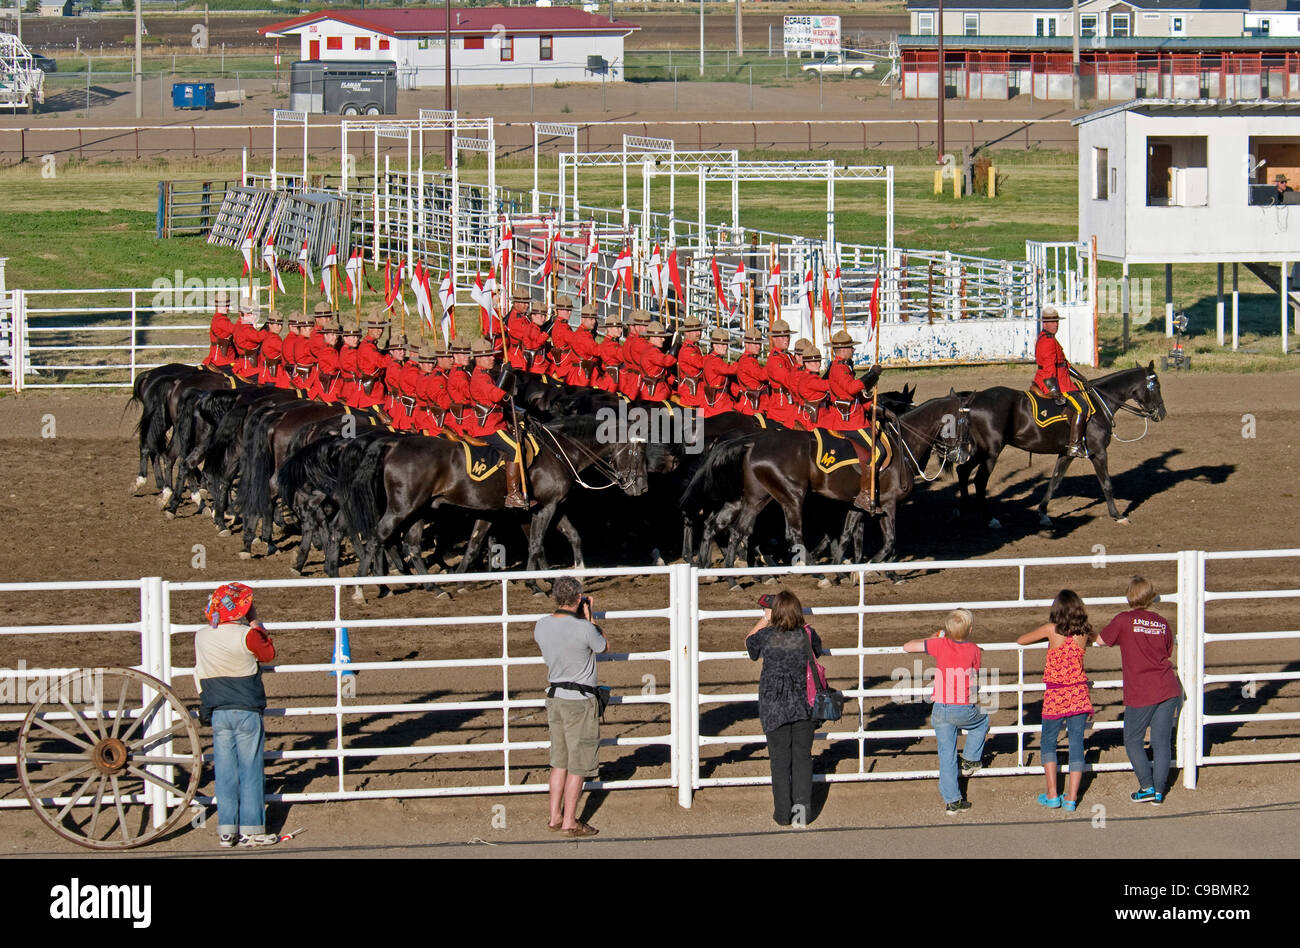 Canada, Alberta, Lethbridge, Royal Canadian Mounted Police Musical Ride, RCMP cavalry in full dress red serge uniform on horses Stock Photo